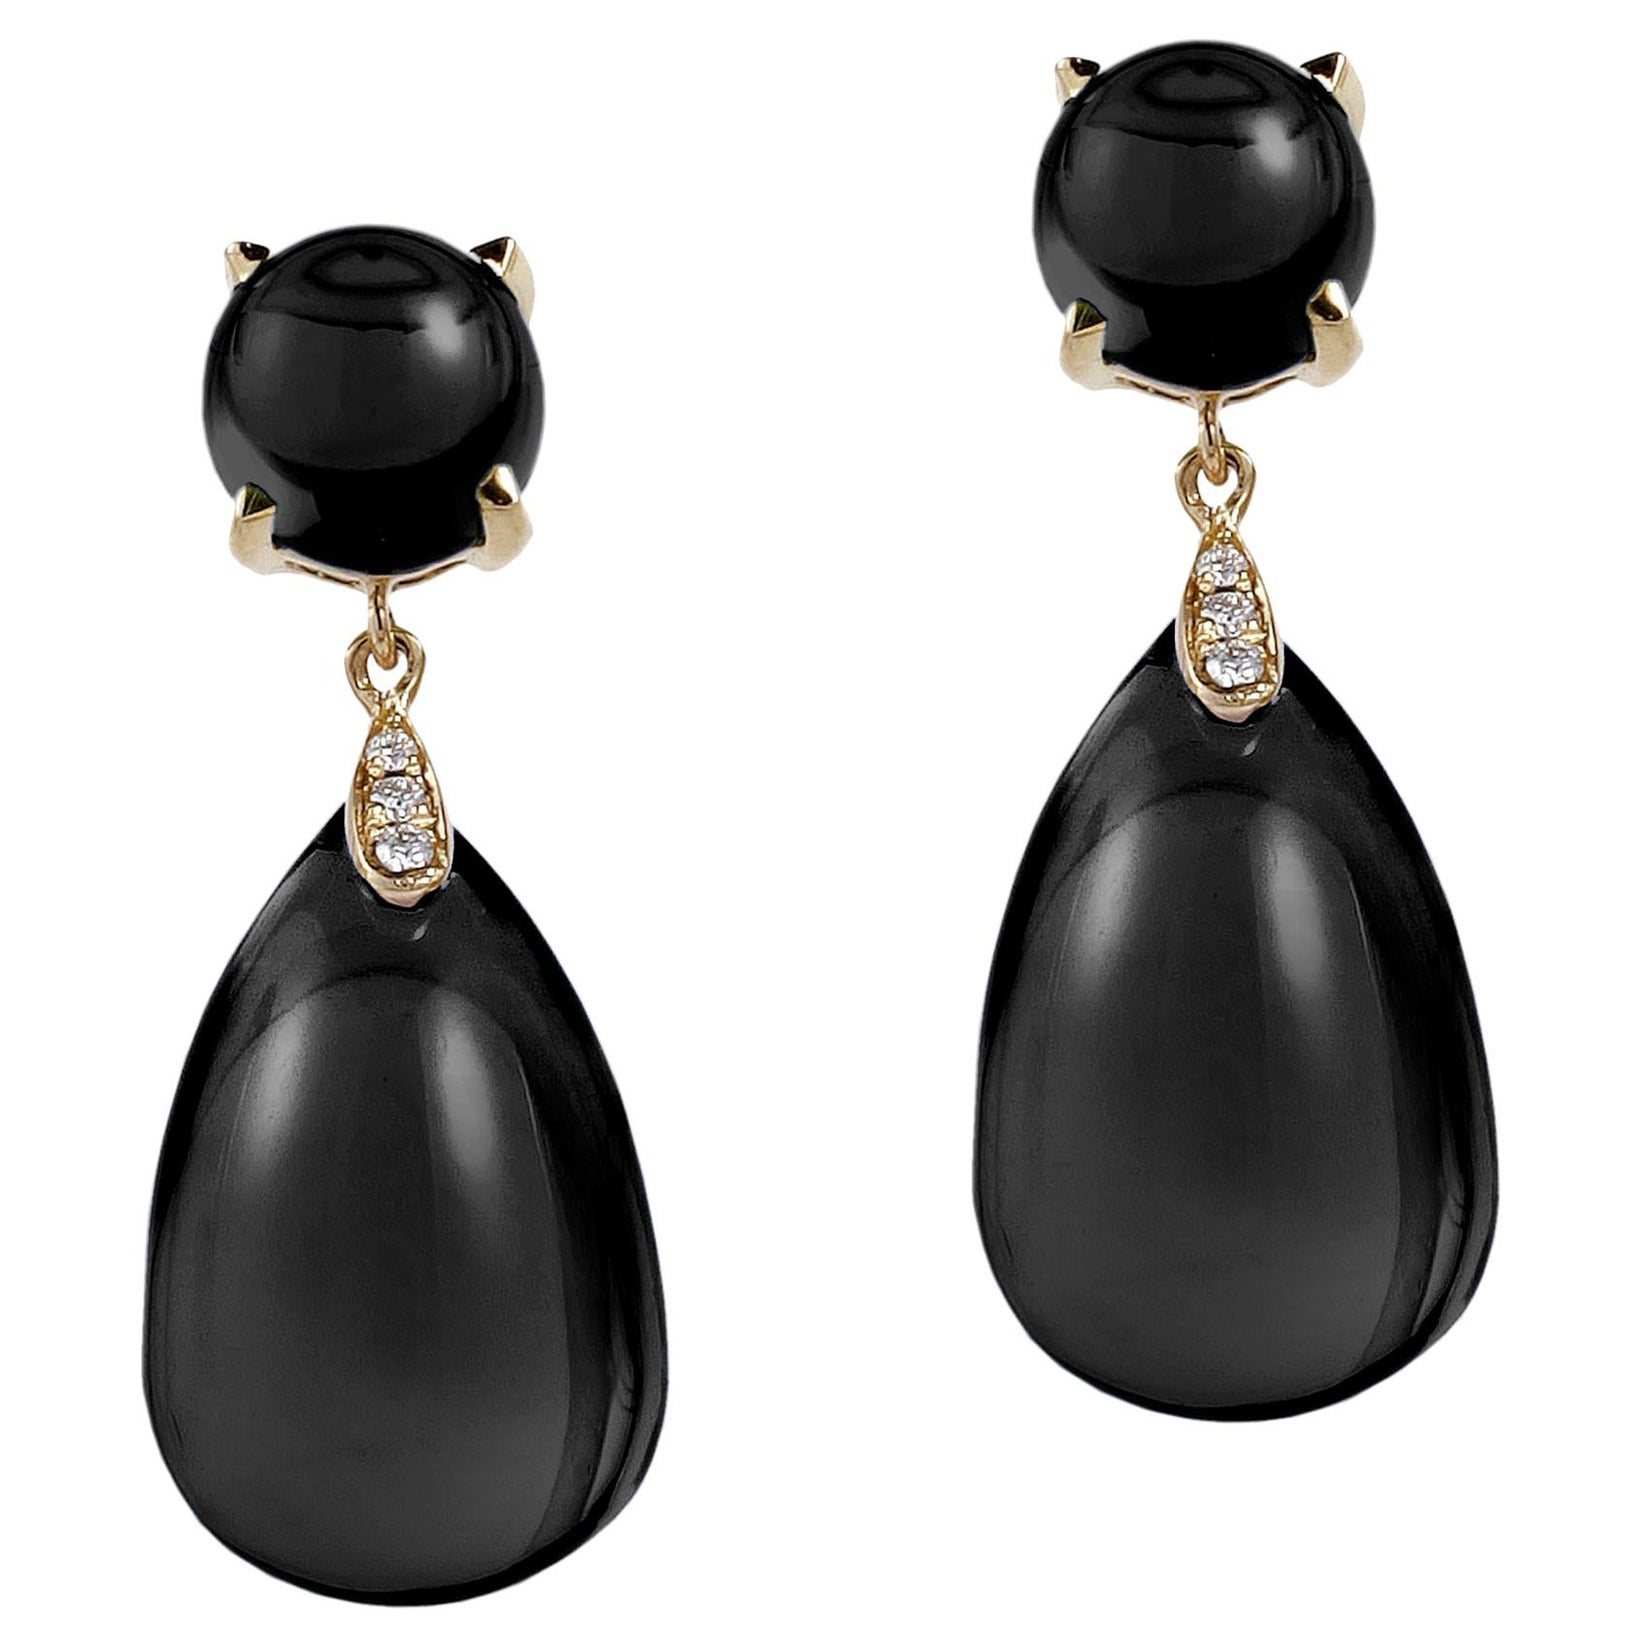 Goshwara Onyx Drop and Onyx Cabochon with Diamond Earrings For Sale